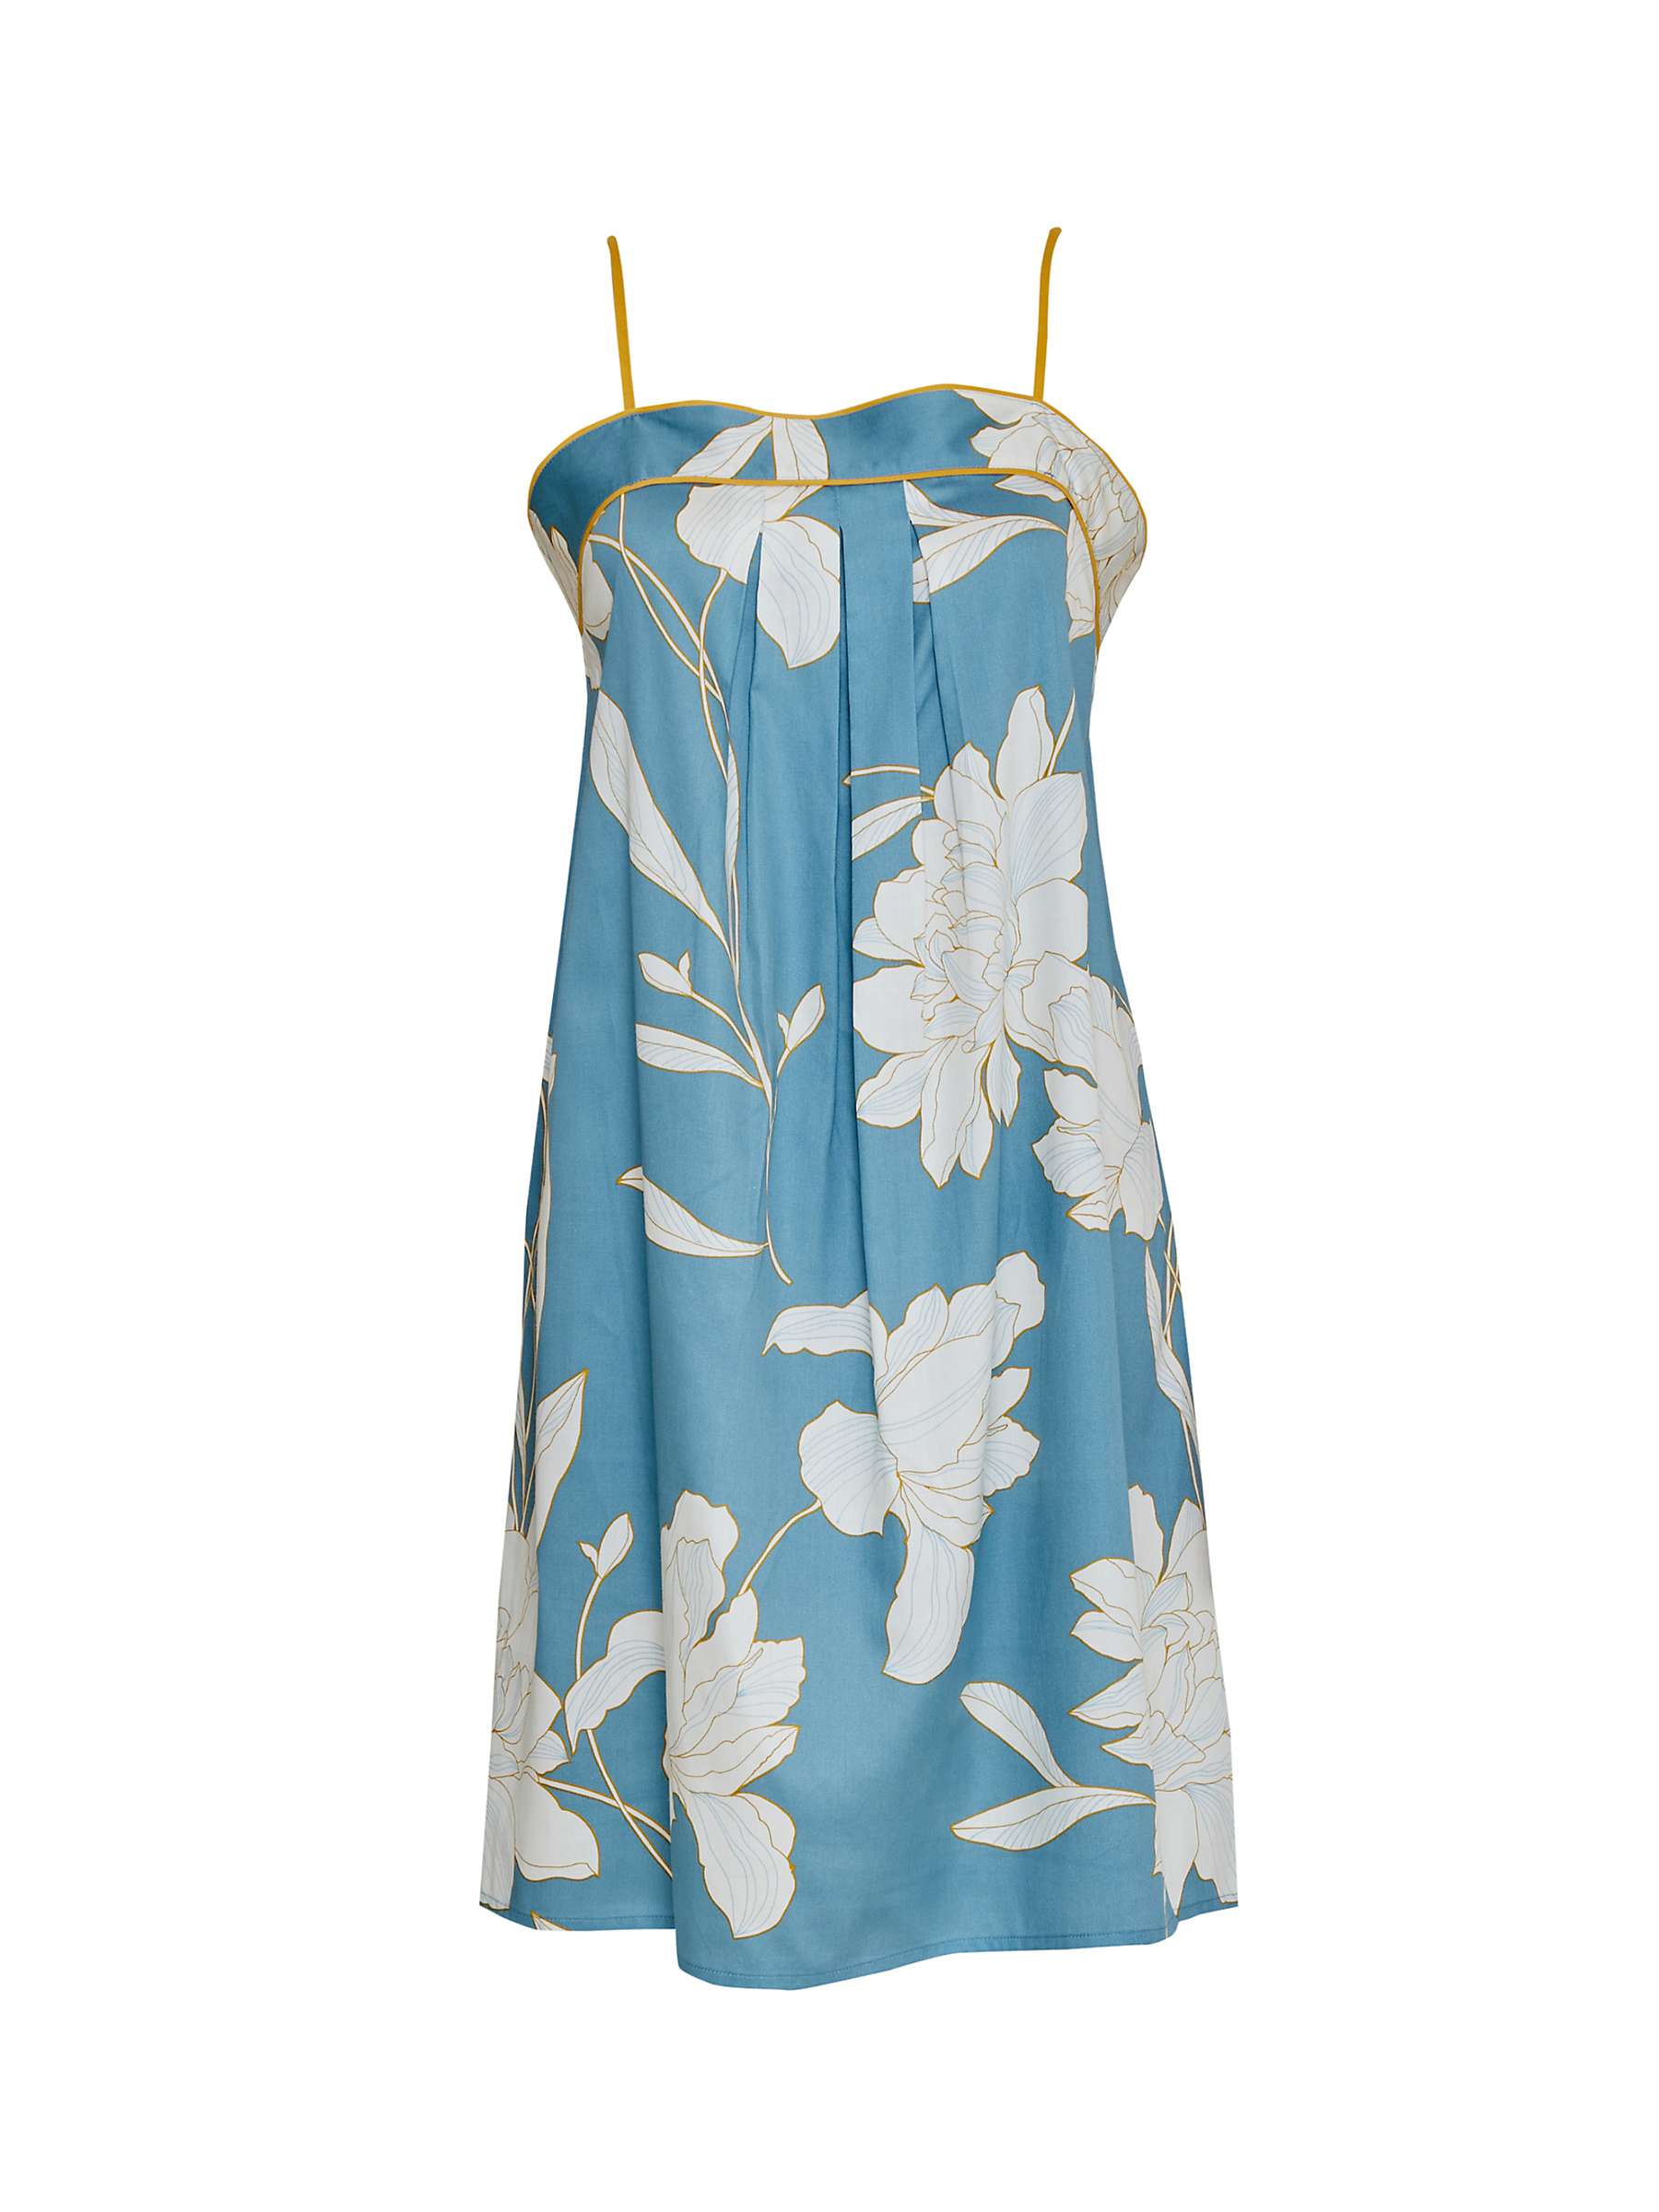 Buy Fable & Eve Greenwich Knee Length Nightdress, Cerulean Blue Online at johnlewis.com